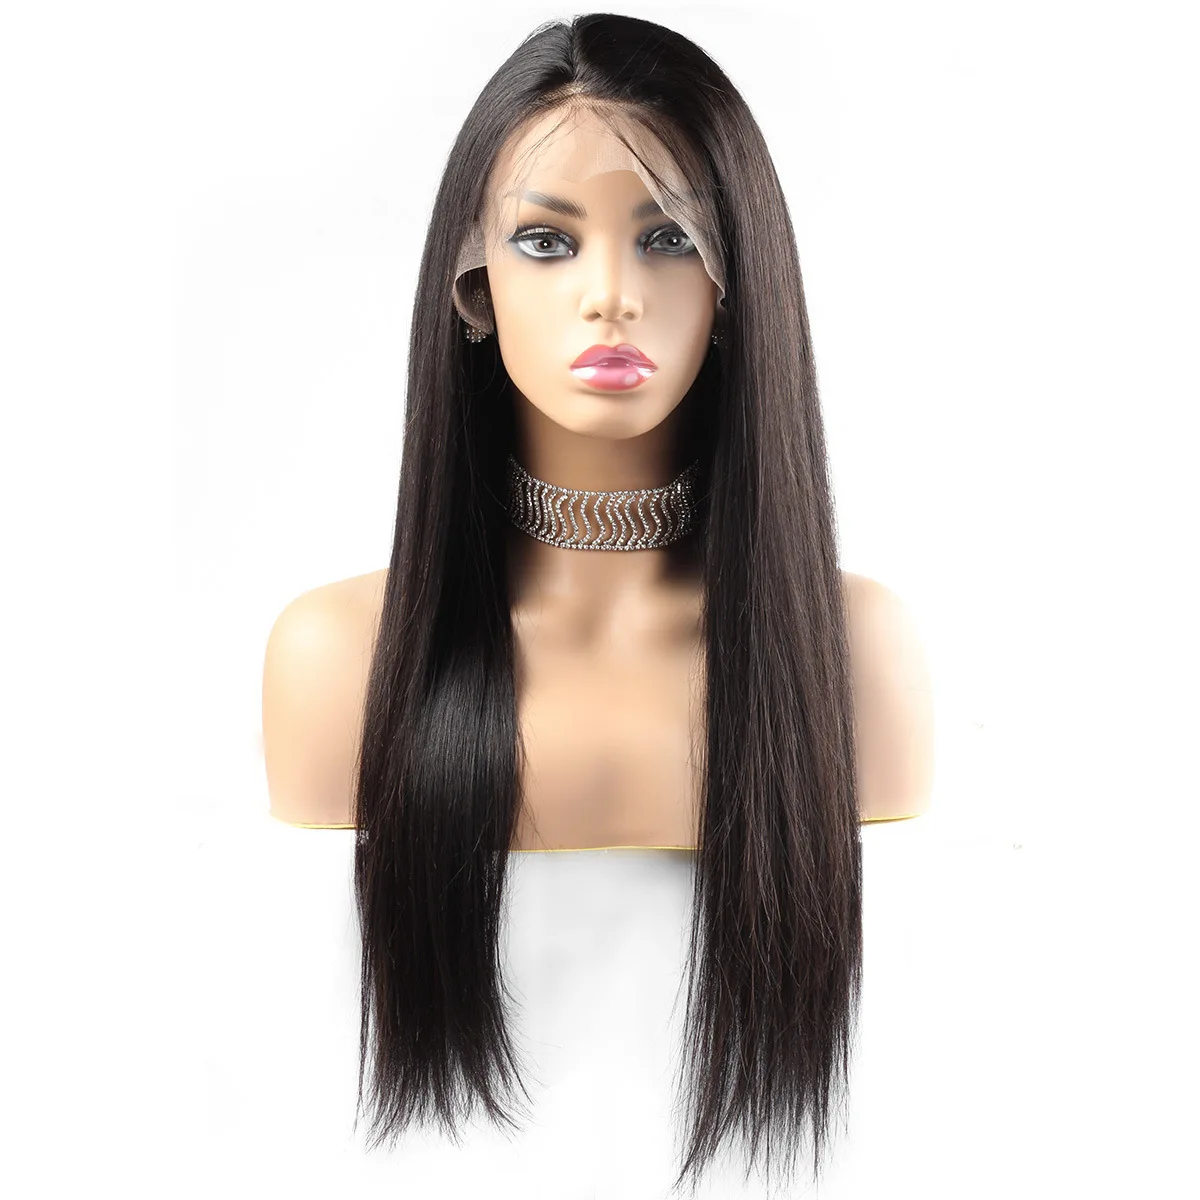 Remy Human Hair wig 13x4 Long natural black long straight lace Frontal Wigs with bangs for women